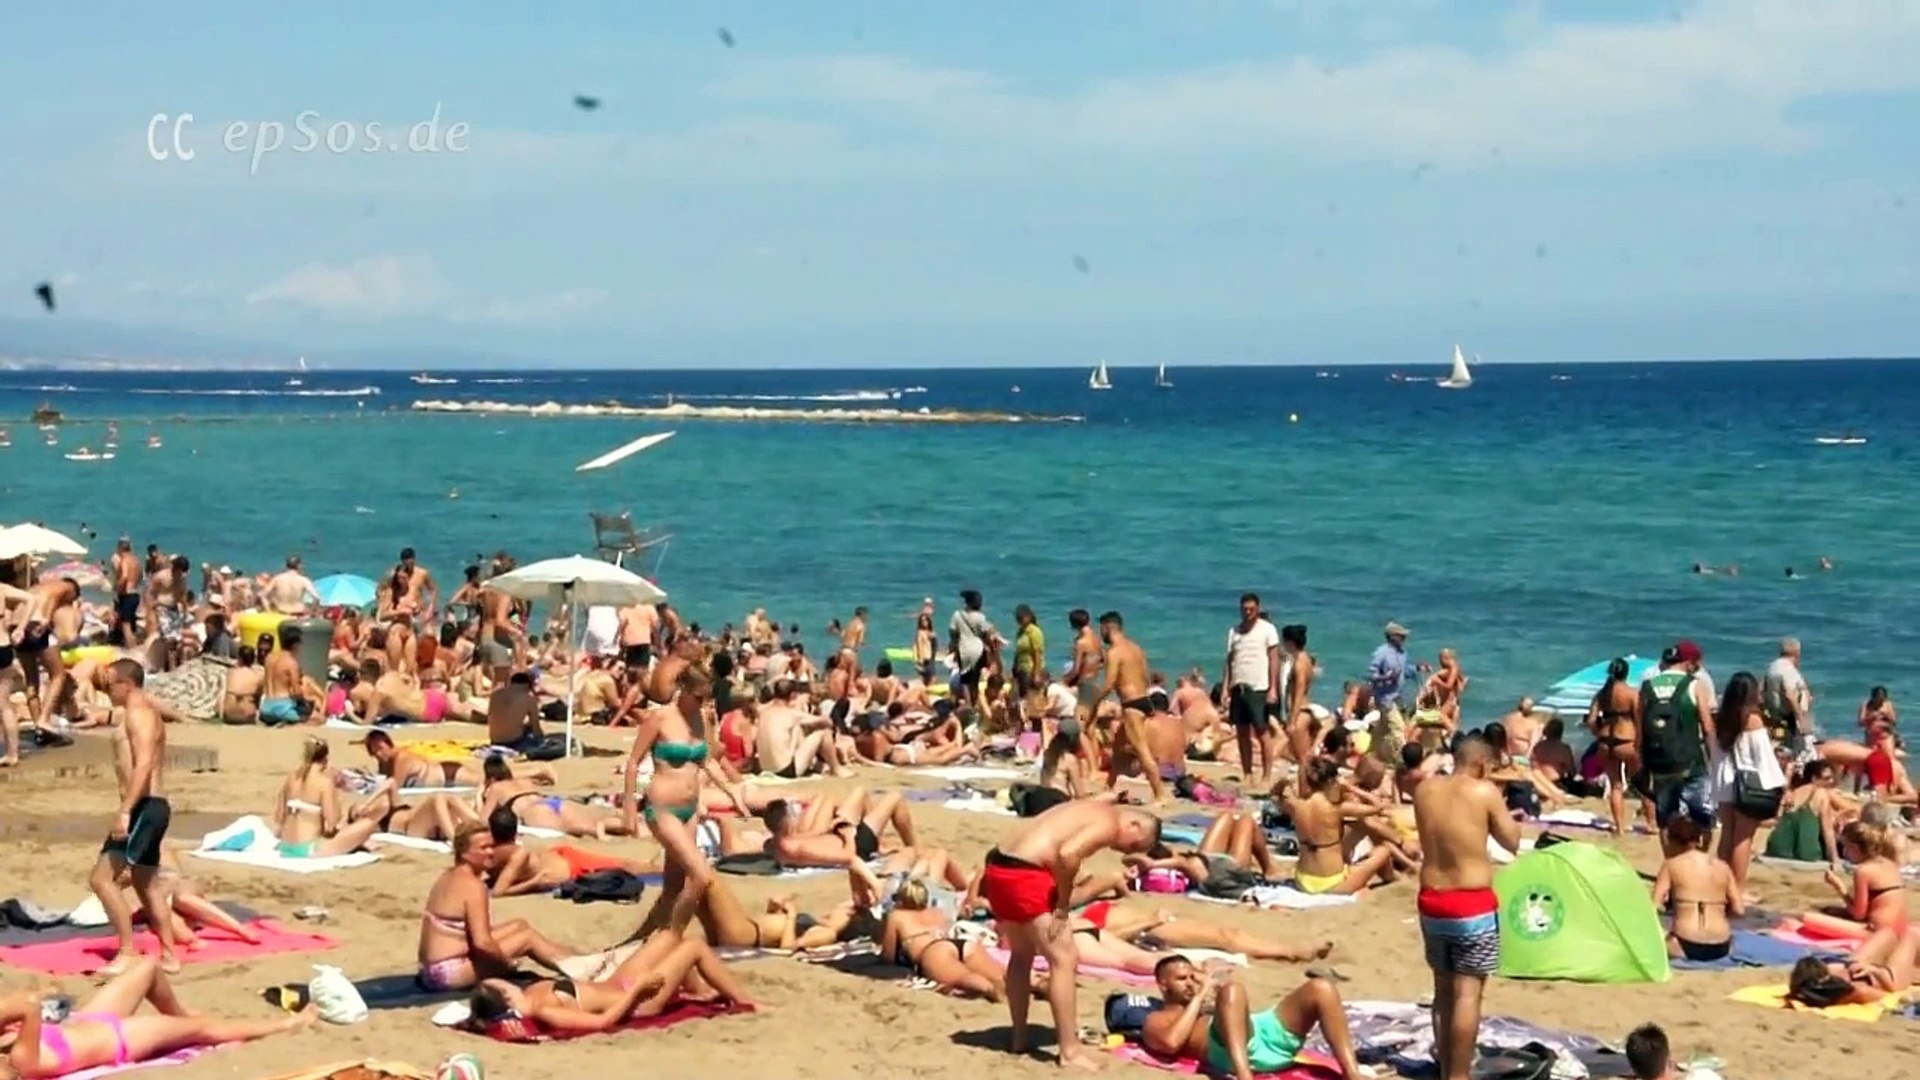 Nudism Public Sex - Sex party at Barcelona Beach of Barceloneta